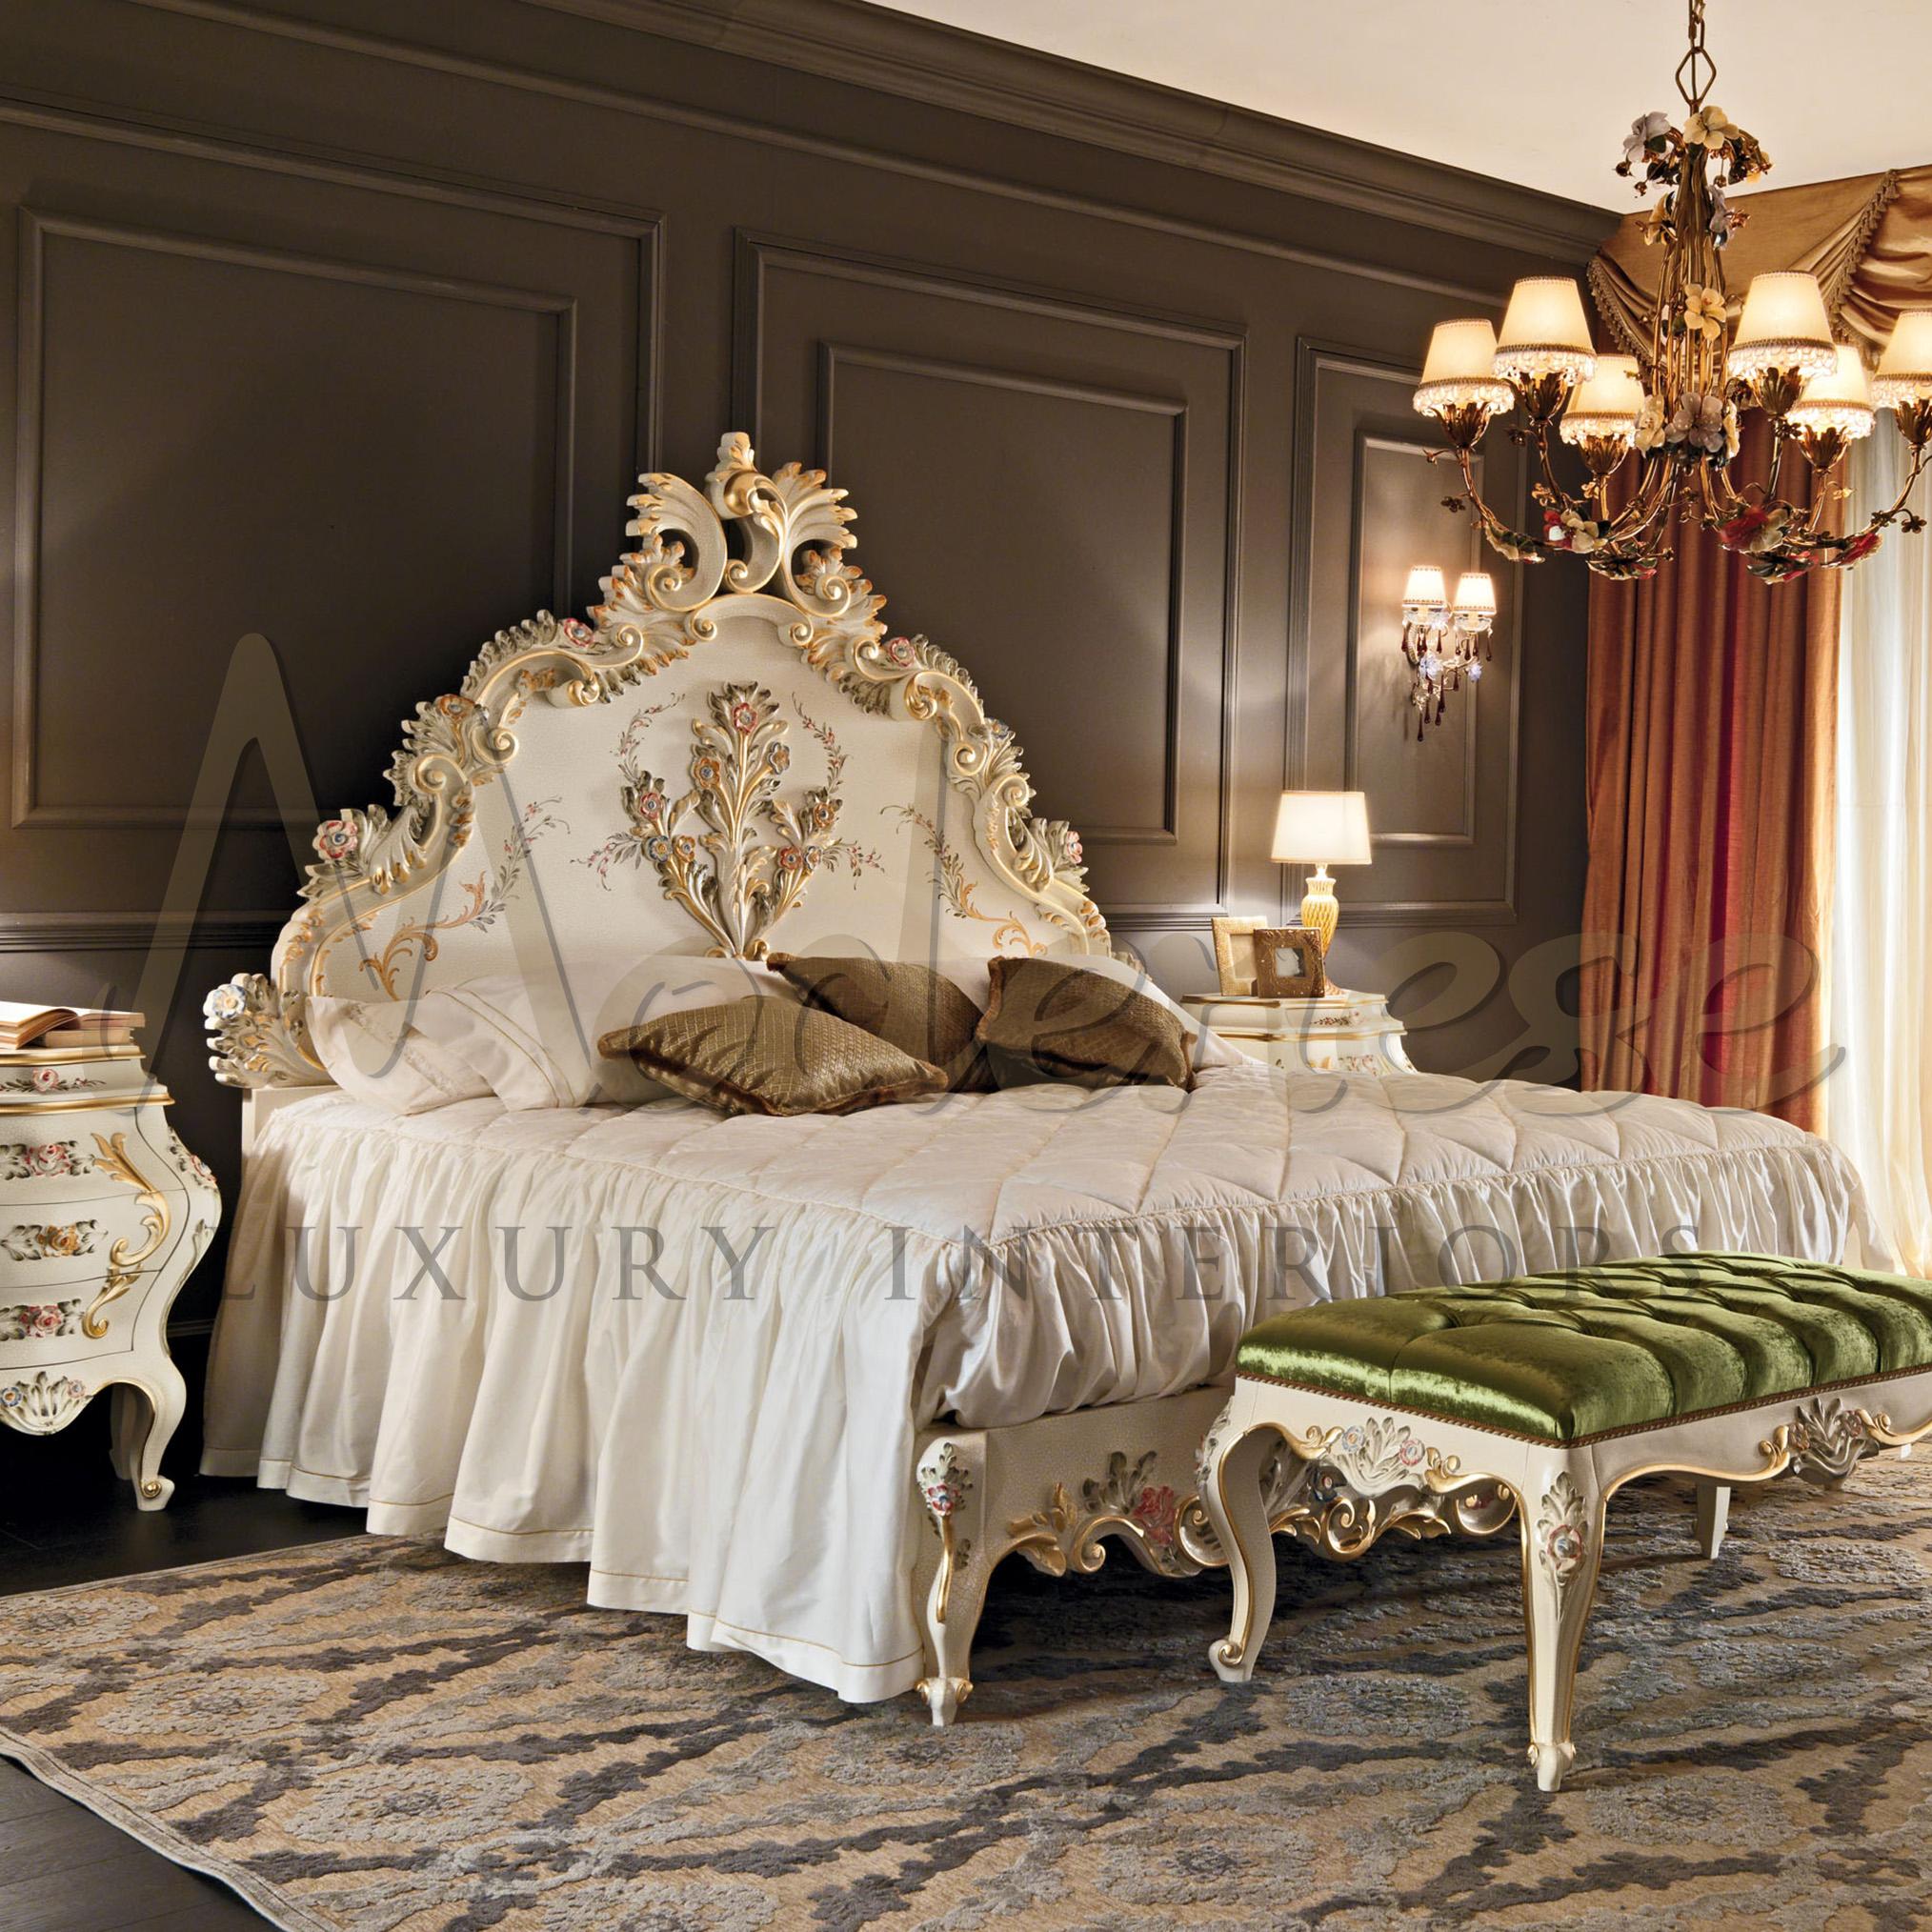 Exceptional Italian furniture, a unique and exclusive double bed without footboard from Modenese Interiors Luxury production. Its dramatic use of baroque carvings gives the right contrast to the light ivory finishing of this item, which is further